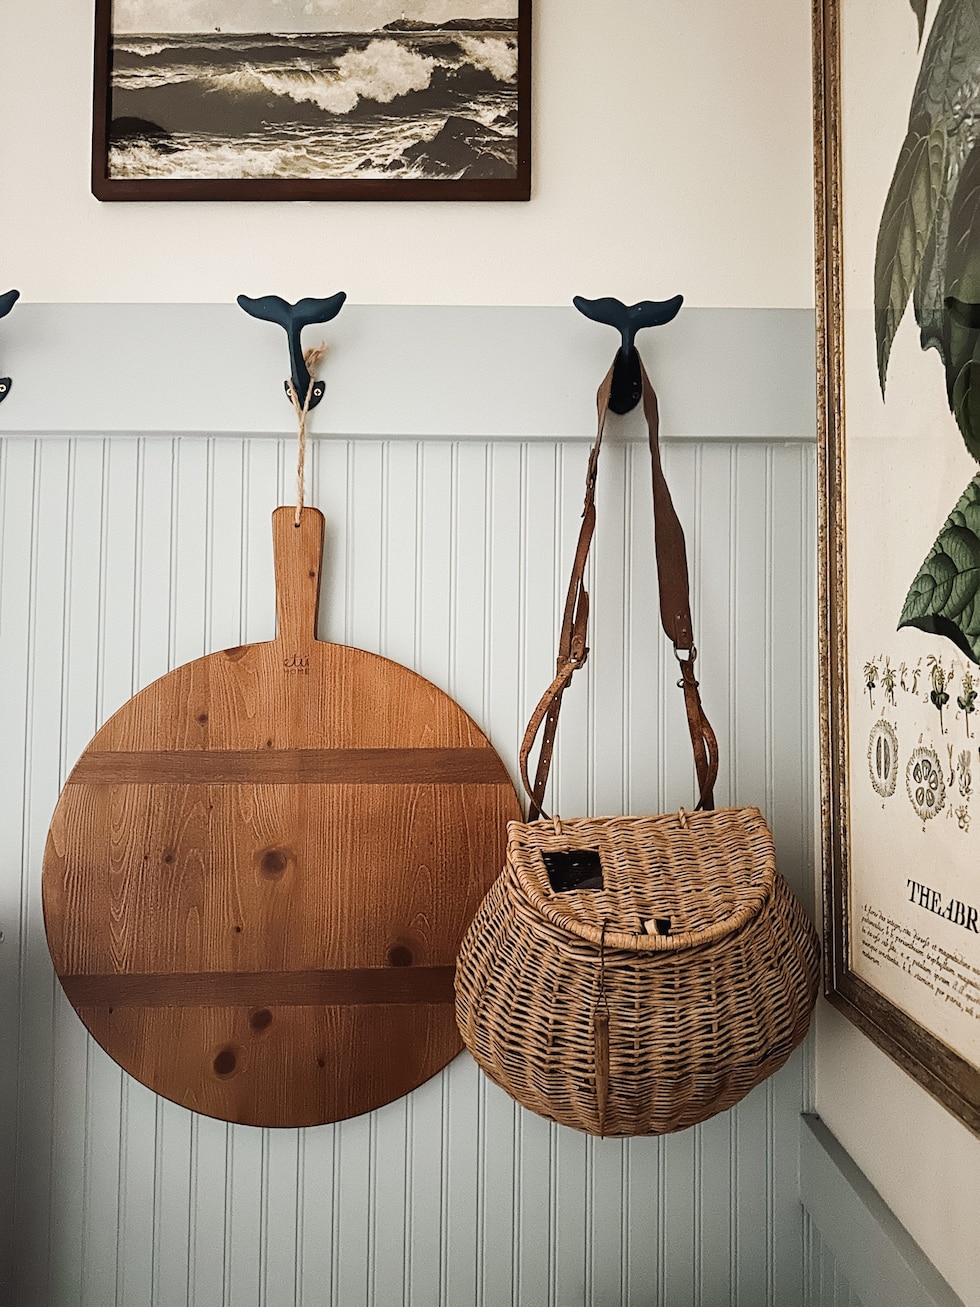 Decorating with Fishing Baskets – The Inspired Room